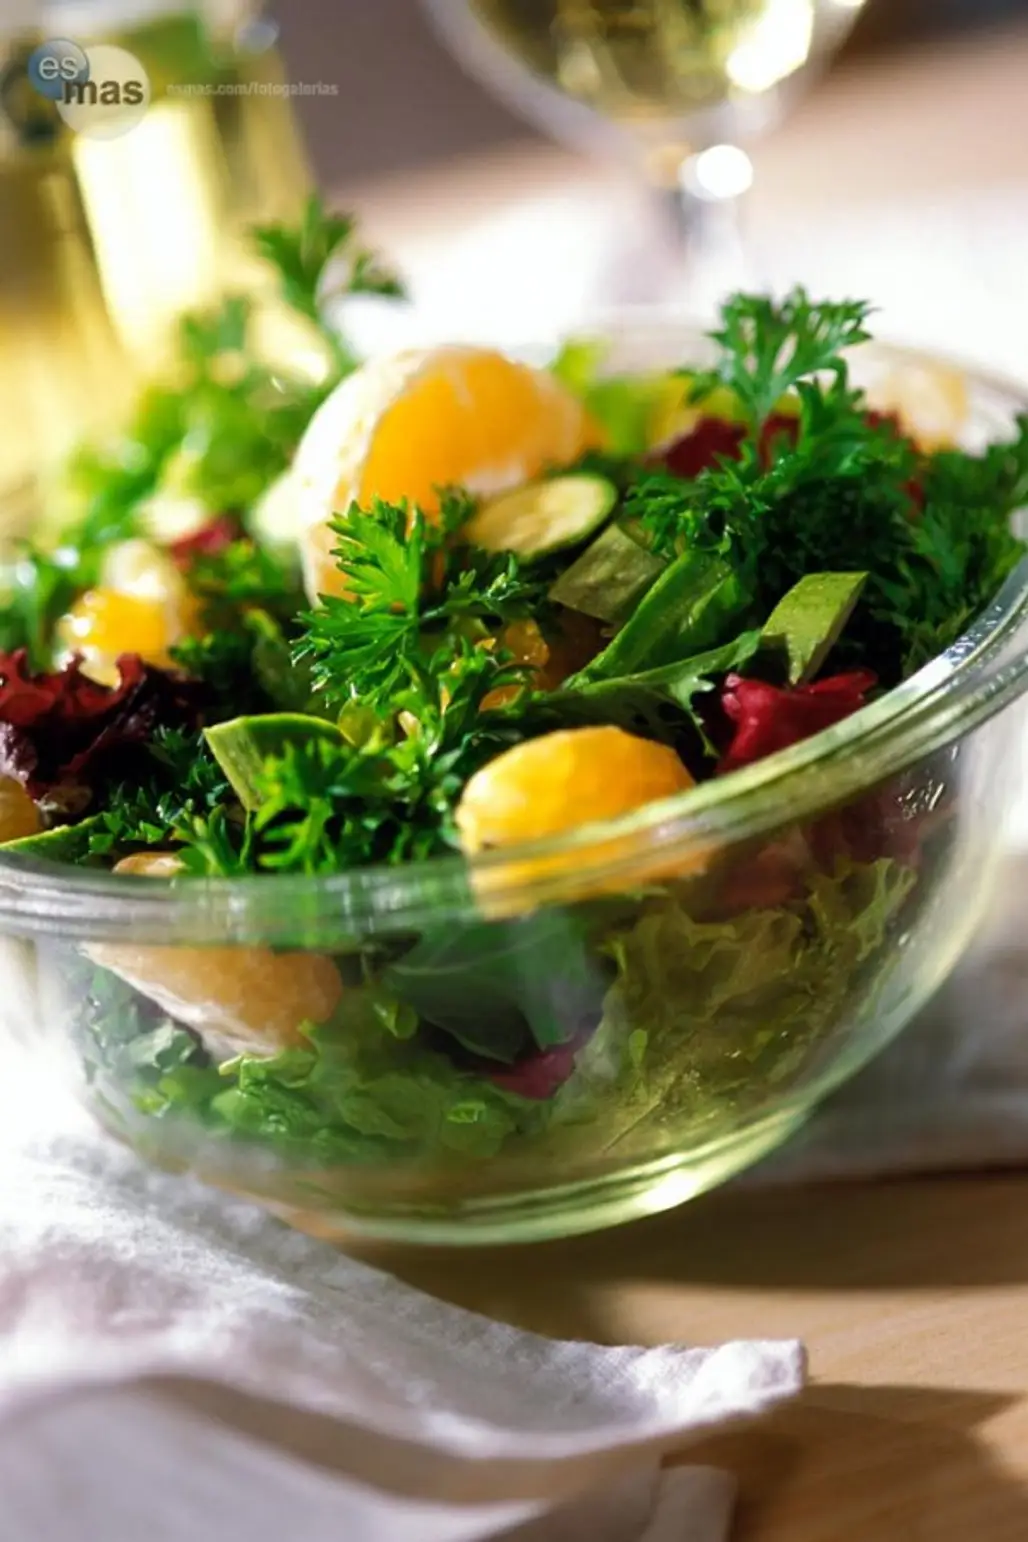 Top Your Salad with 1.5 Oz Reduced-fat Italian Dressing Instead of Regular